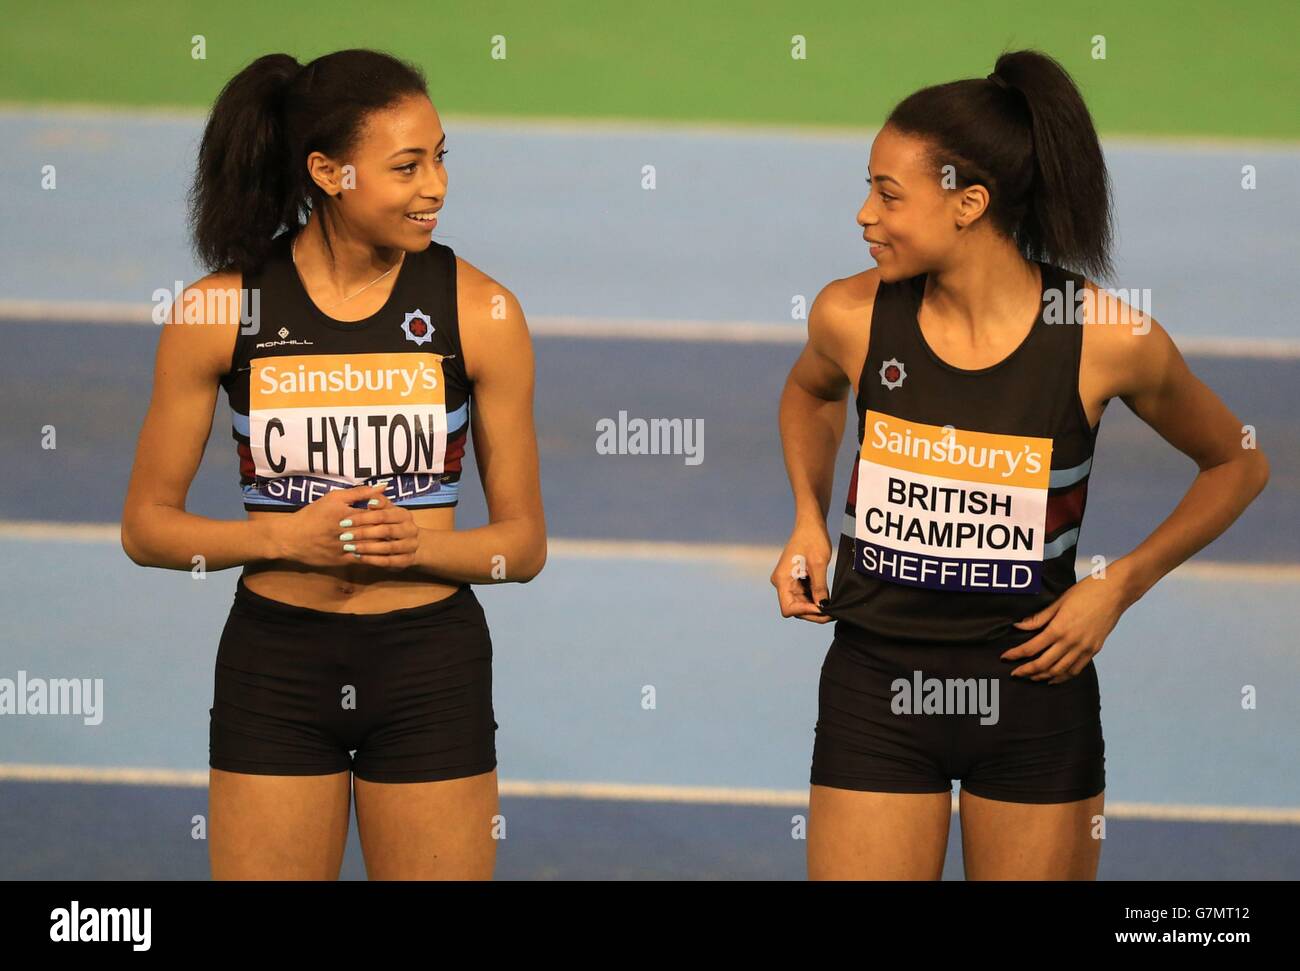 Shannon Hylton (right) and her twin sister Cheriece Hylton after finishing first and second in the women's 200m final during day two of the Sainsbury's British Indoor Championships at the English Institute of Sport, Sheffield. Stock Photo